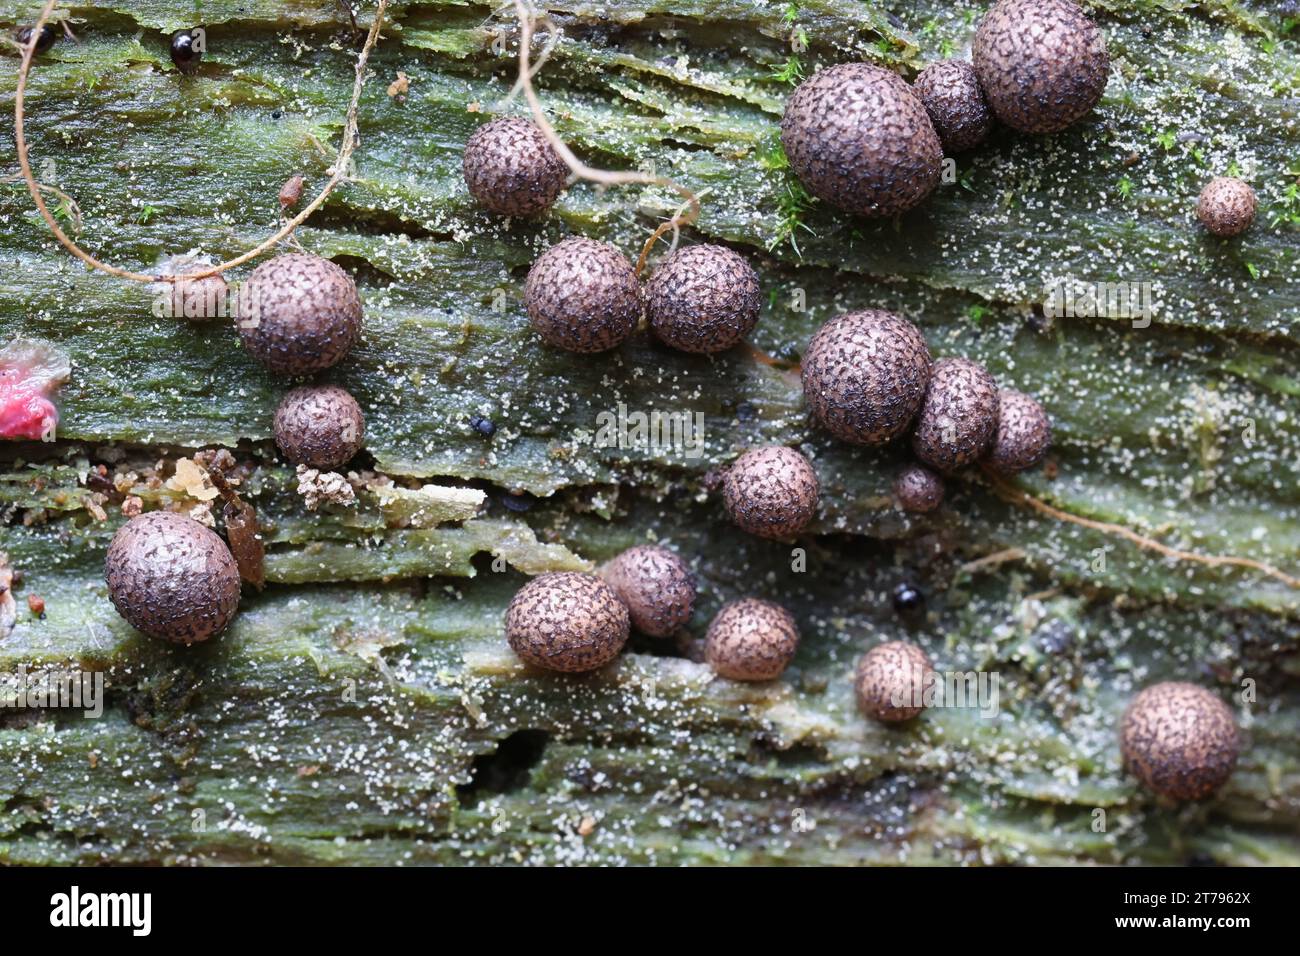 Lycogala roseosporum, a species of wolf's milk, slime mold from Finland Stock Photo